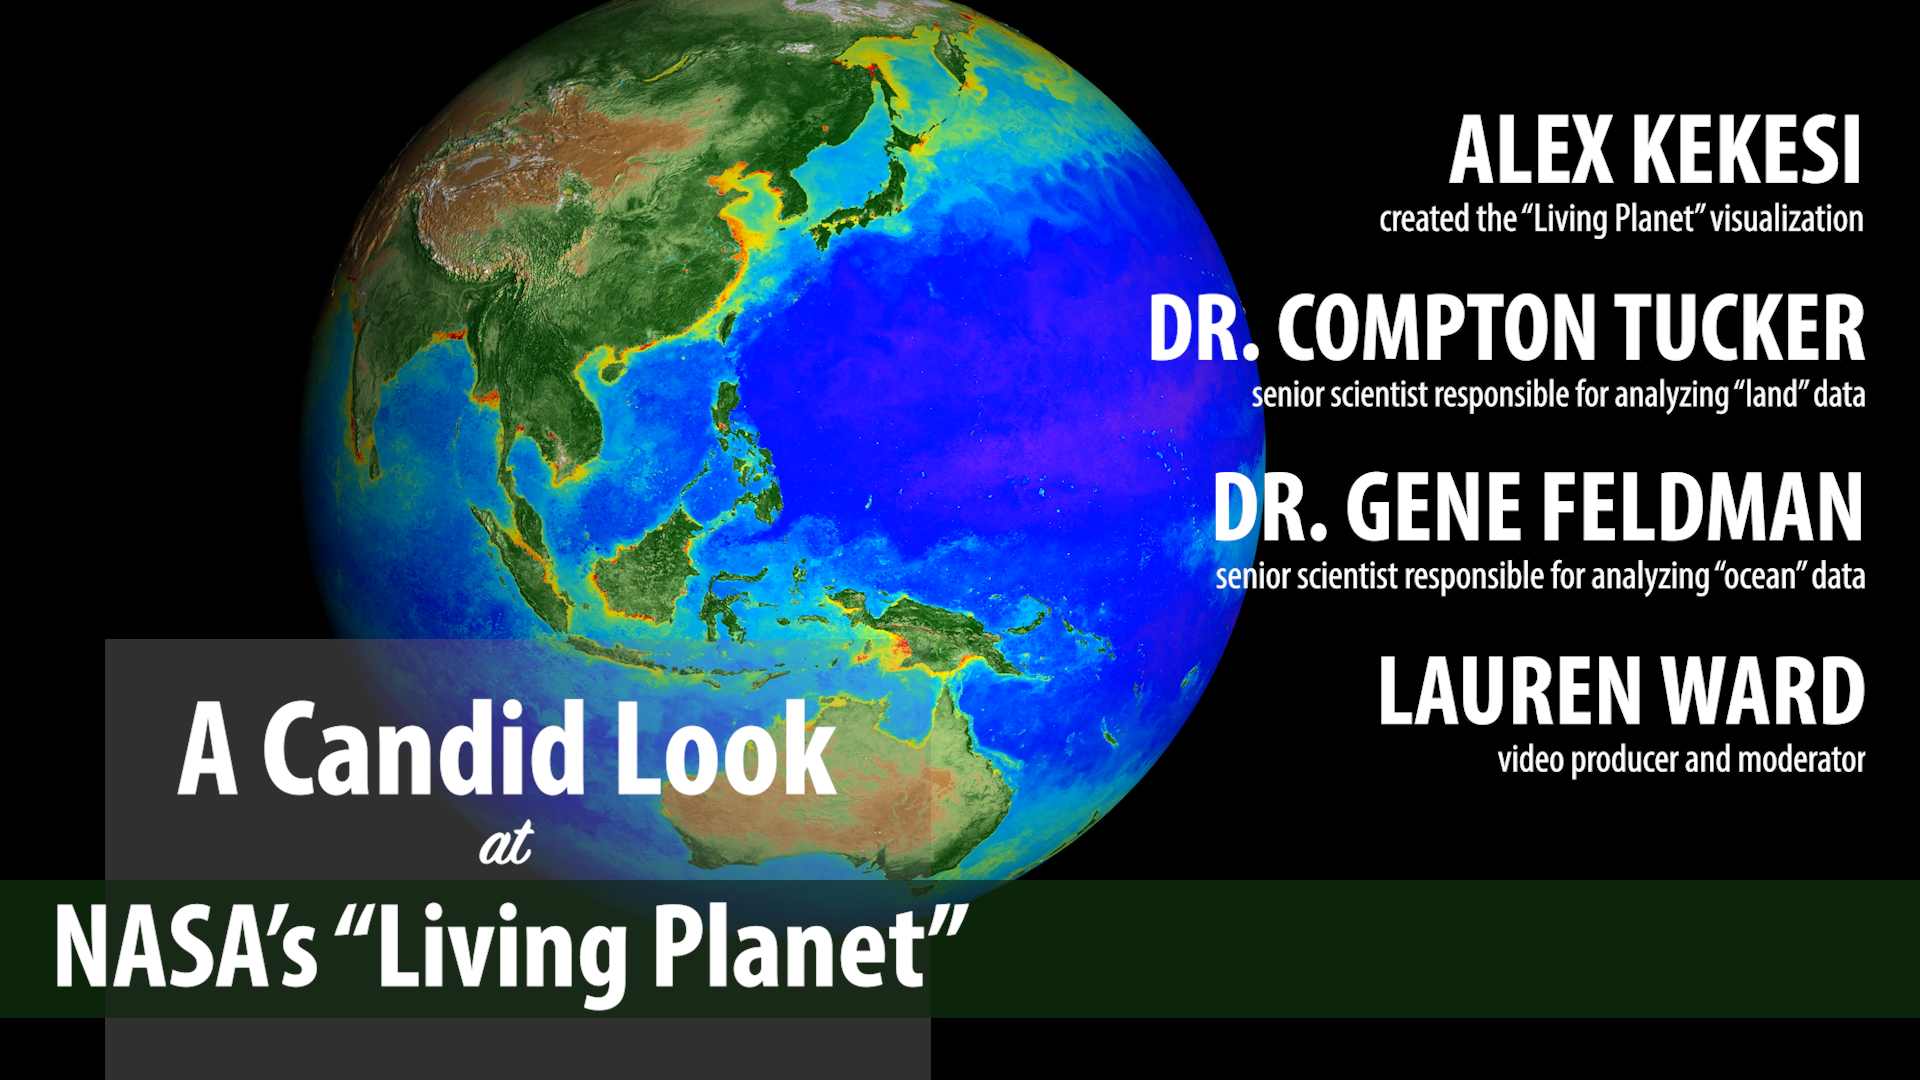 Preview Image for A Candid Look at NASA's "Living Planet"